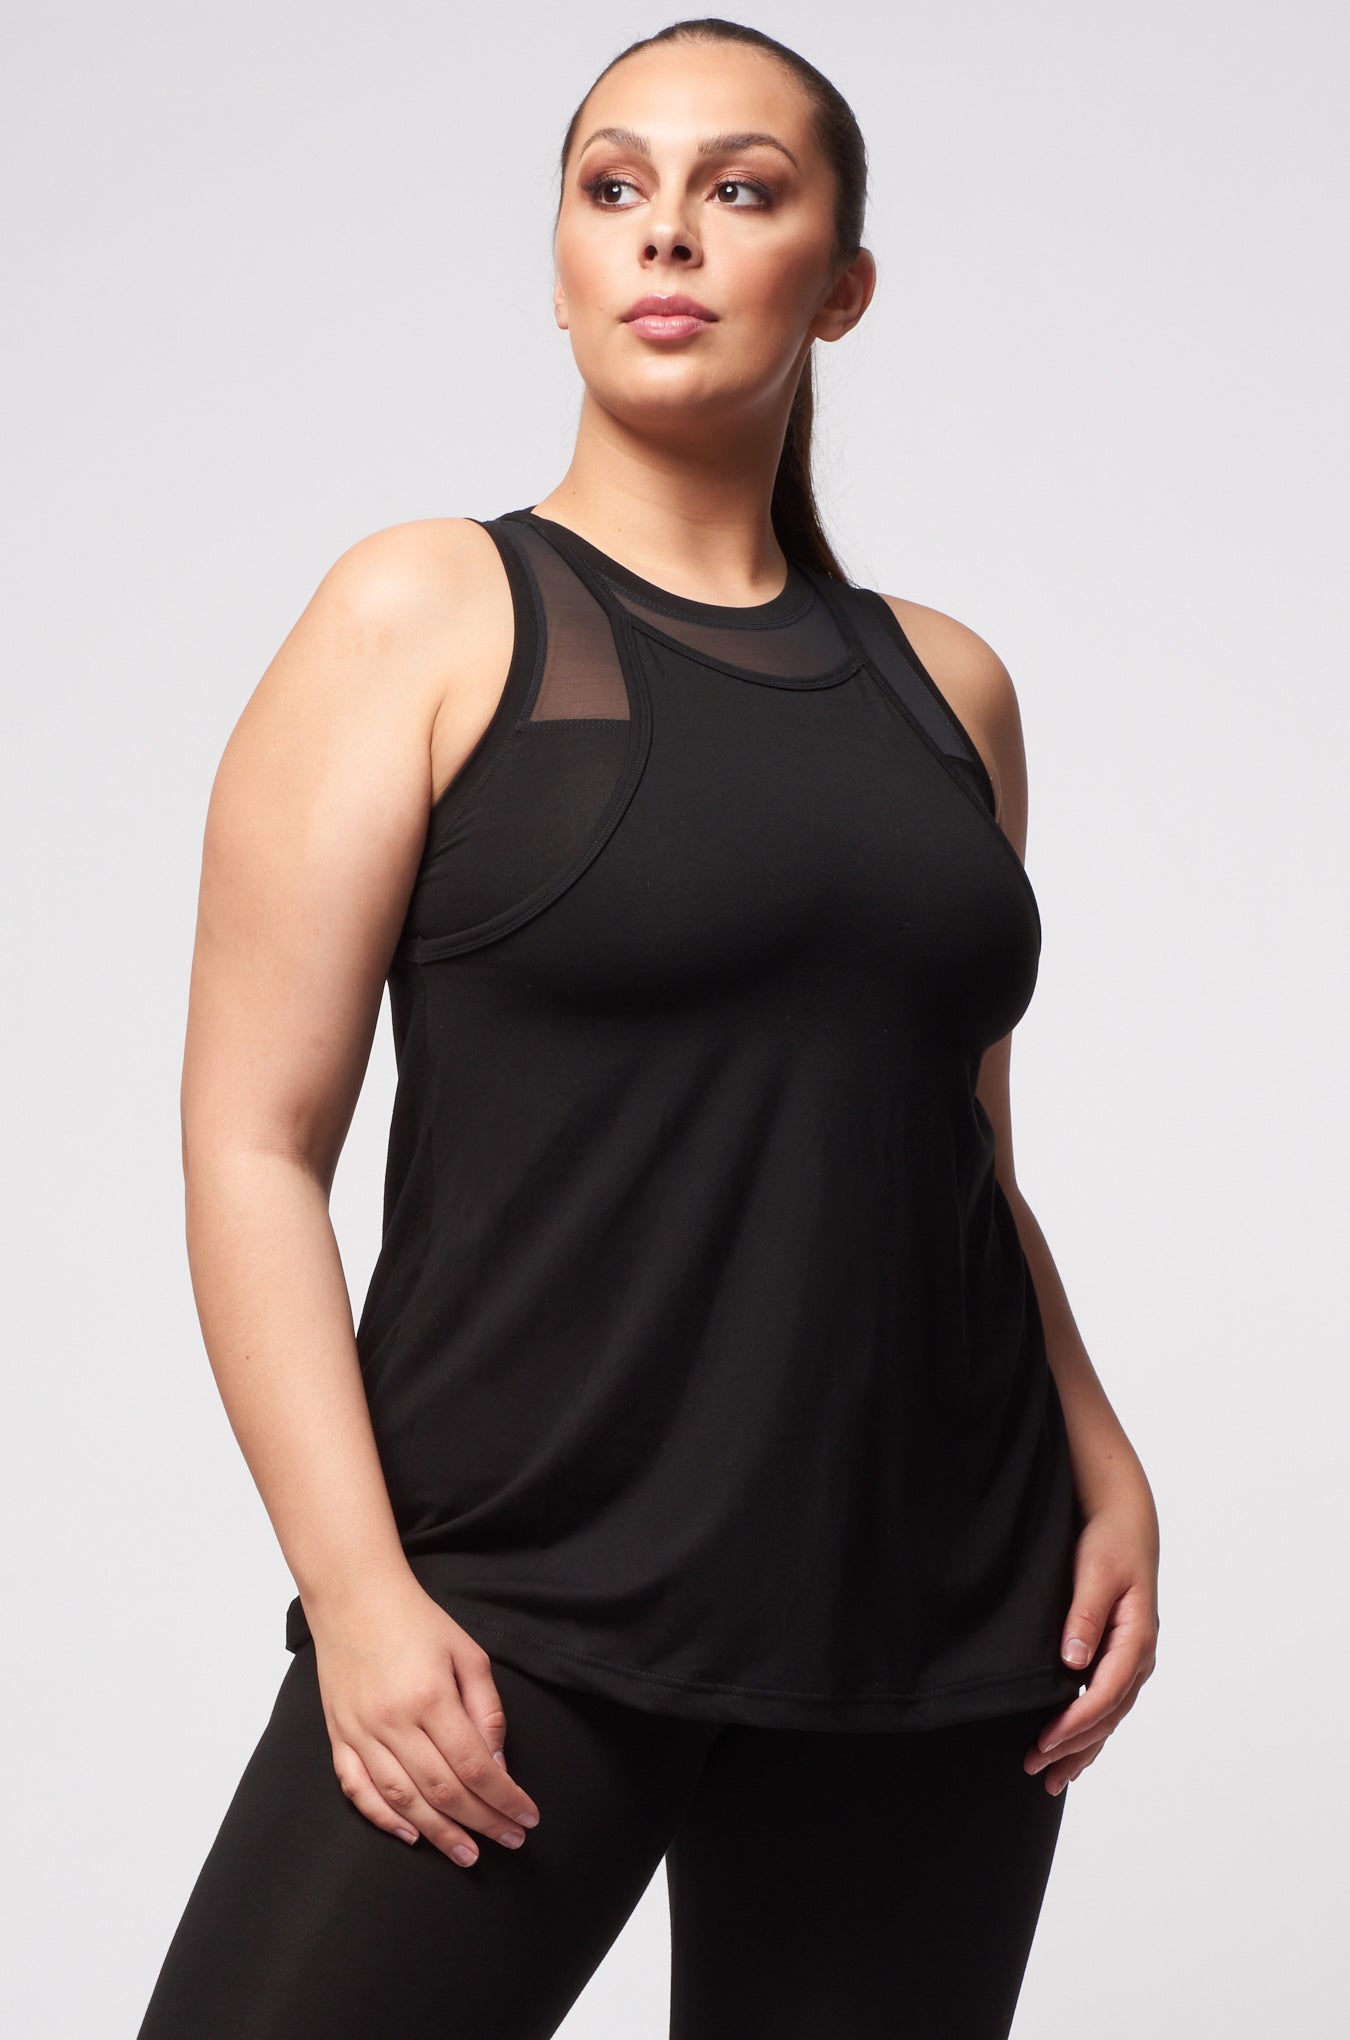 Loose Workout Tops With Built In Bra